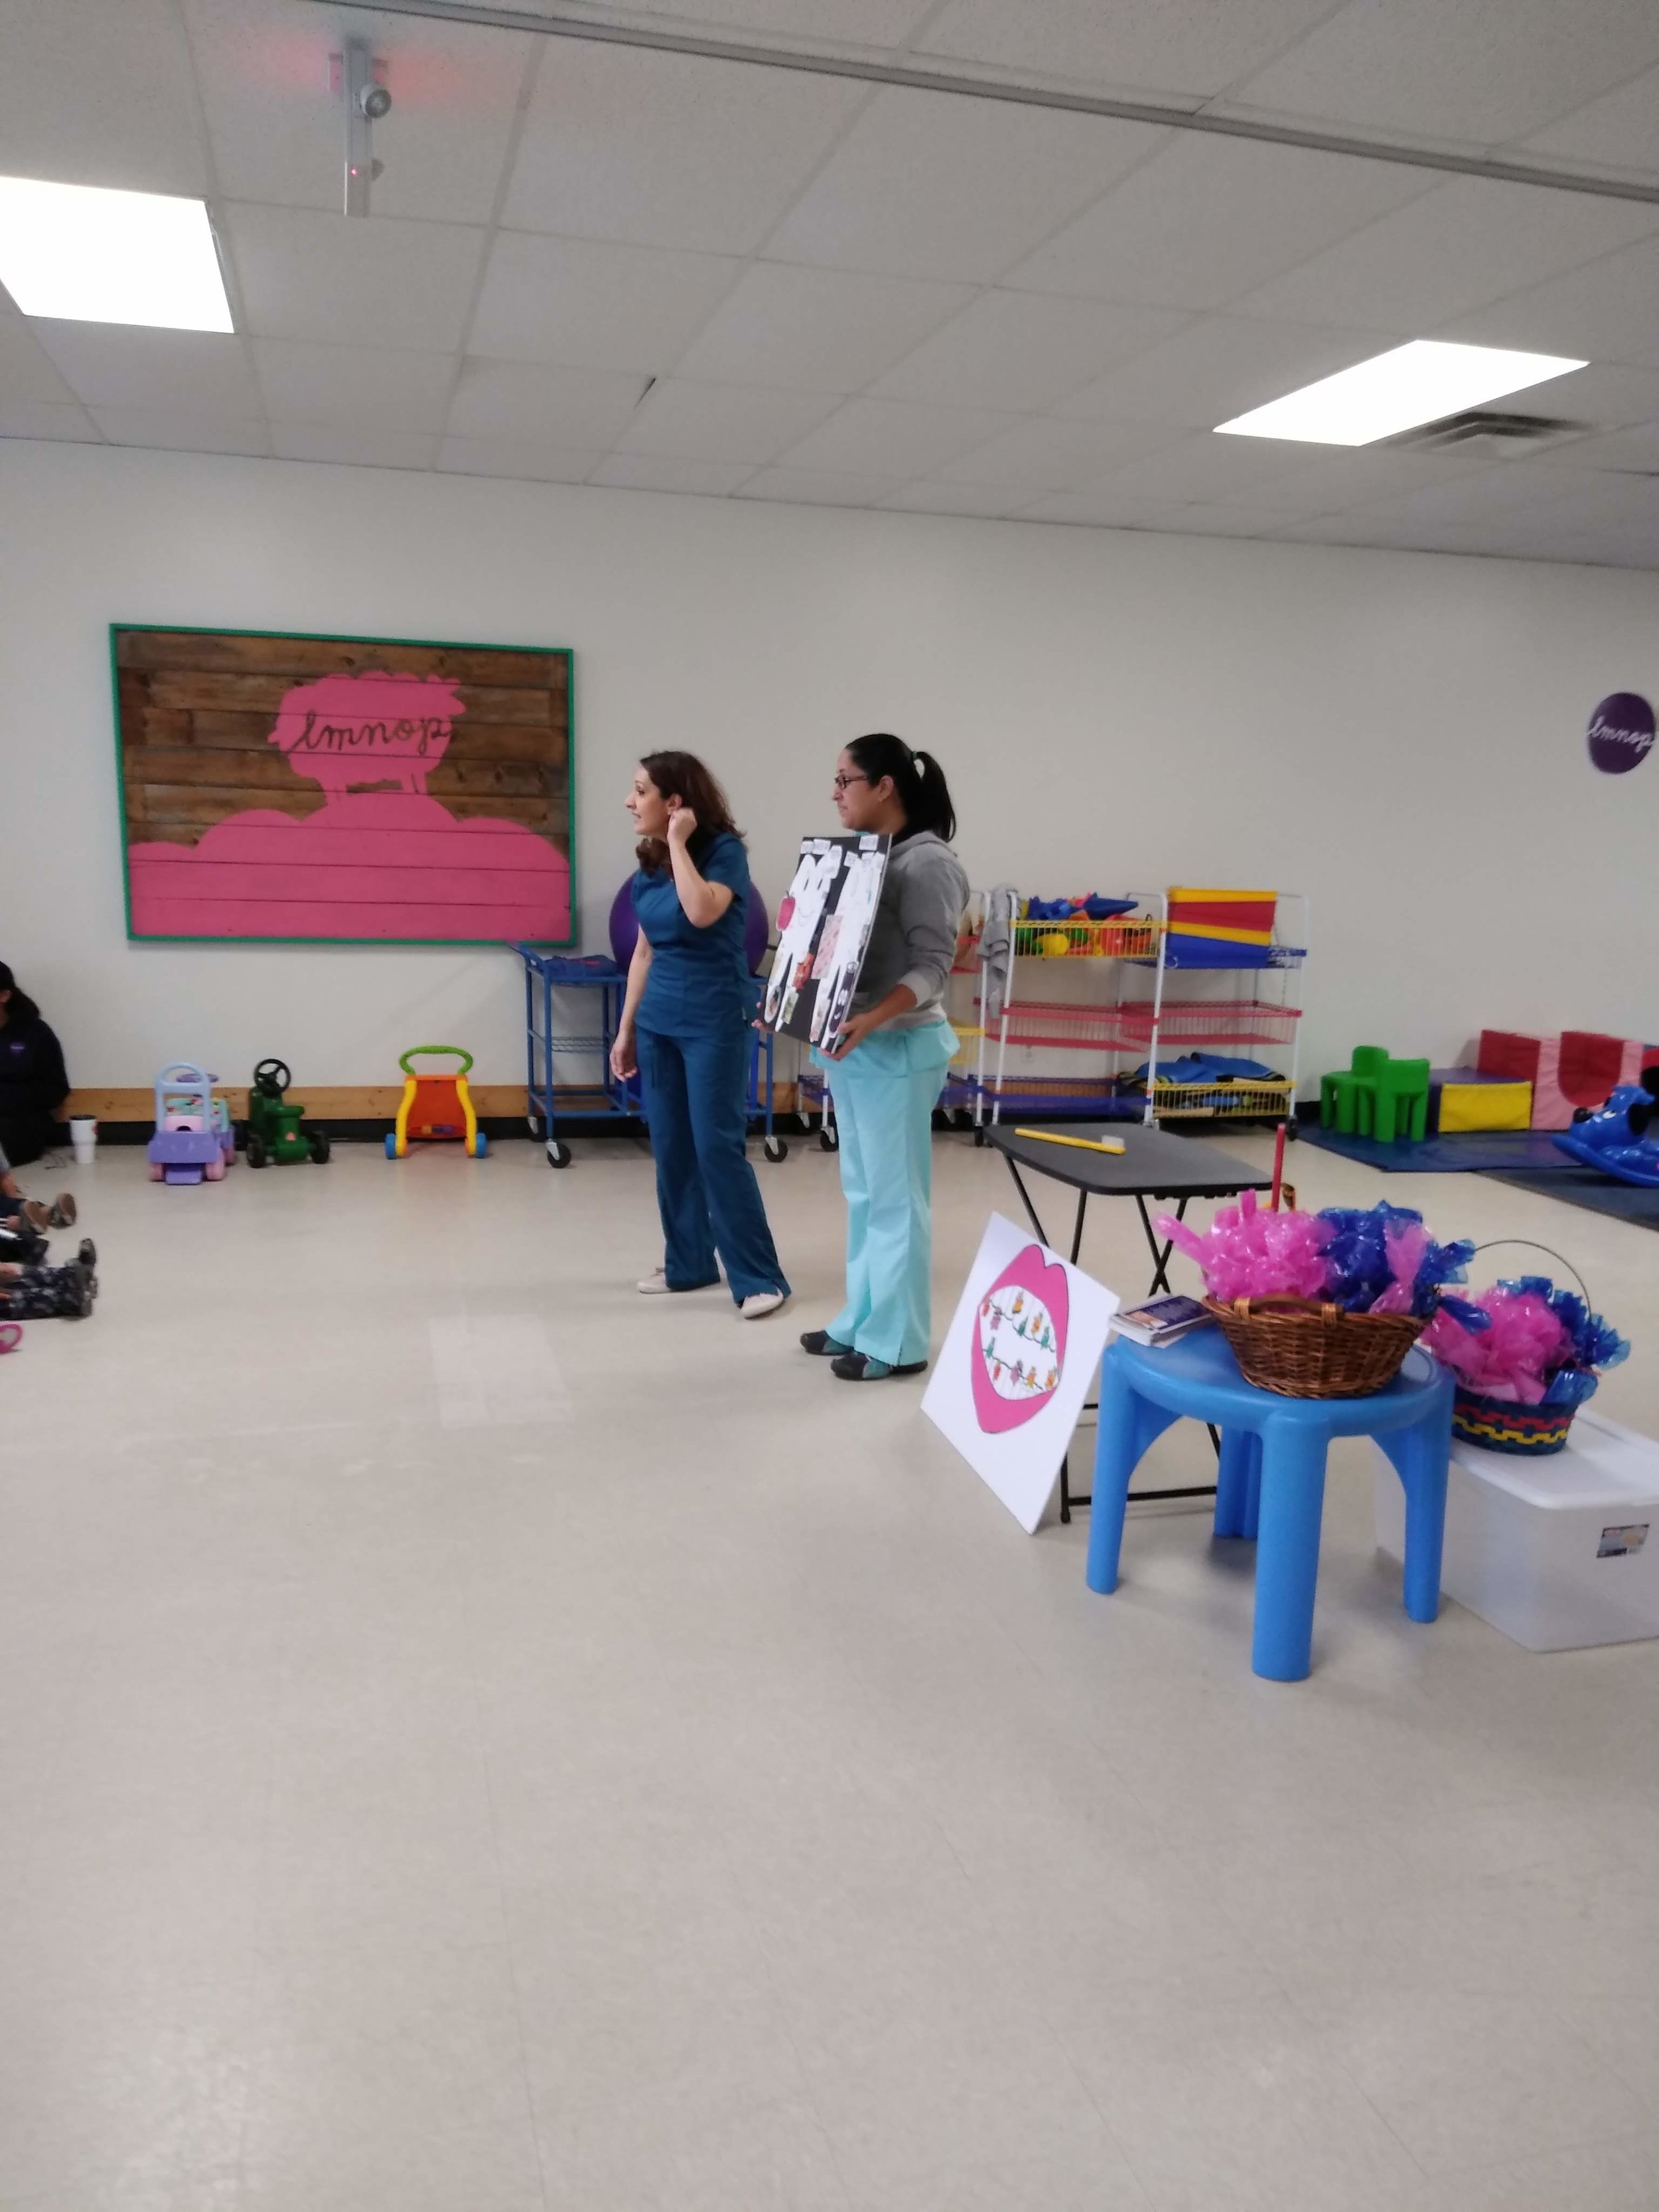 West Plano Dental at LMNOP Children’s Academy Dr. Doctor Van T. Nguyen DDS Community Outreach and Giving Back Medicaid and CHIP